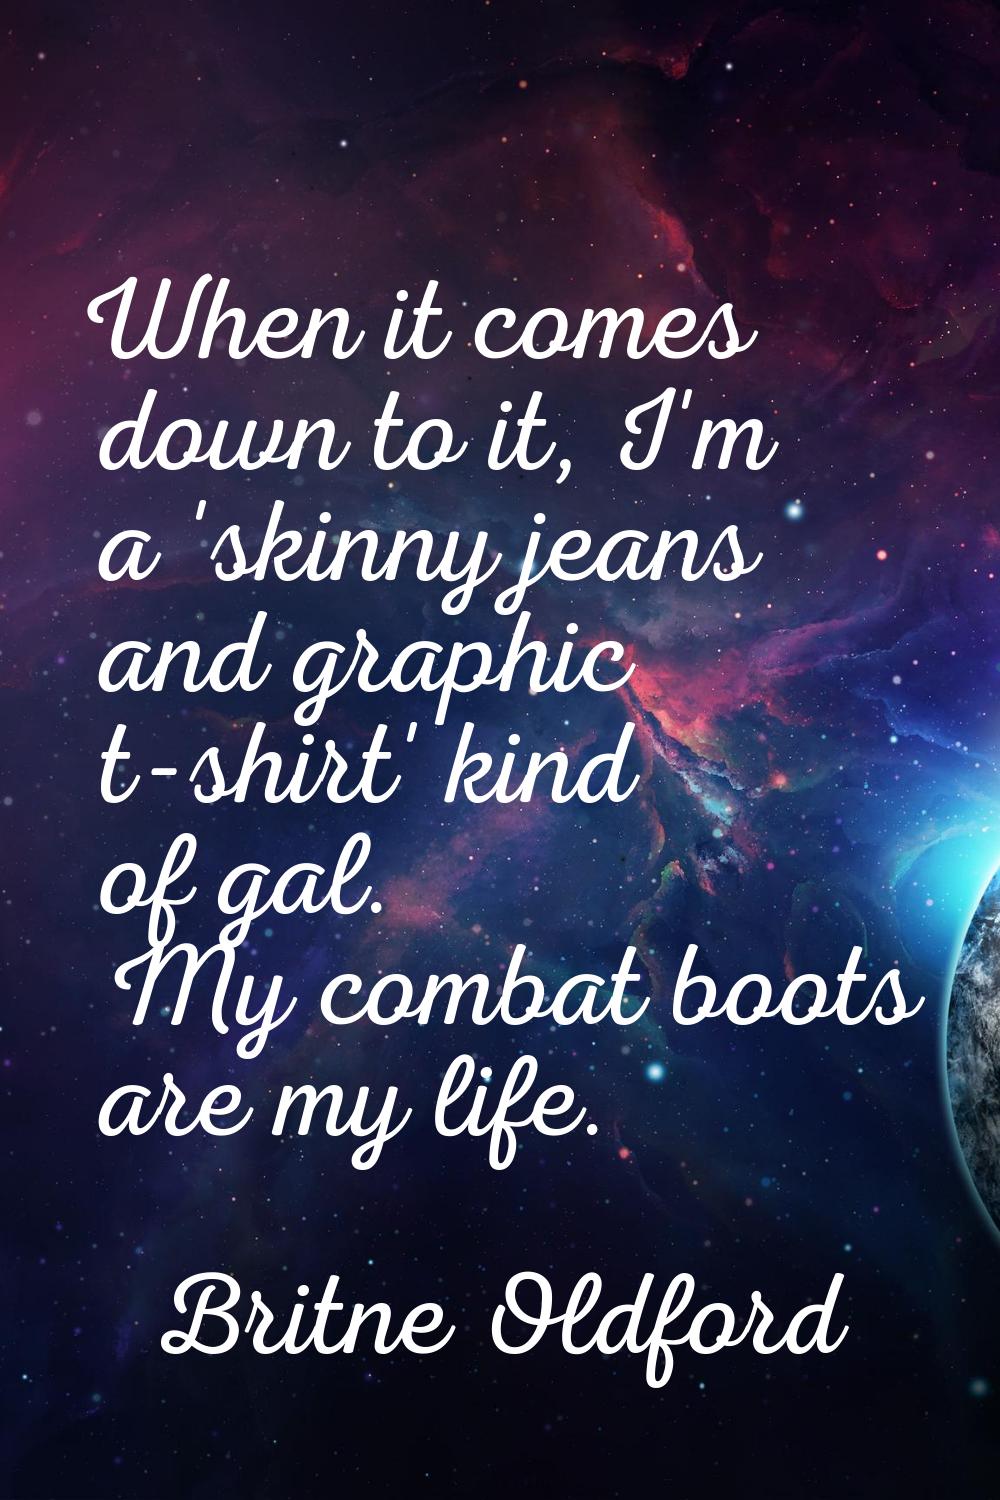 When it comes down to it, I'm a 'skinny jeans and graphic t-shirt' kind of gal. My combat boots are